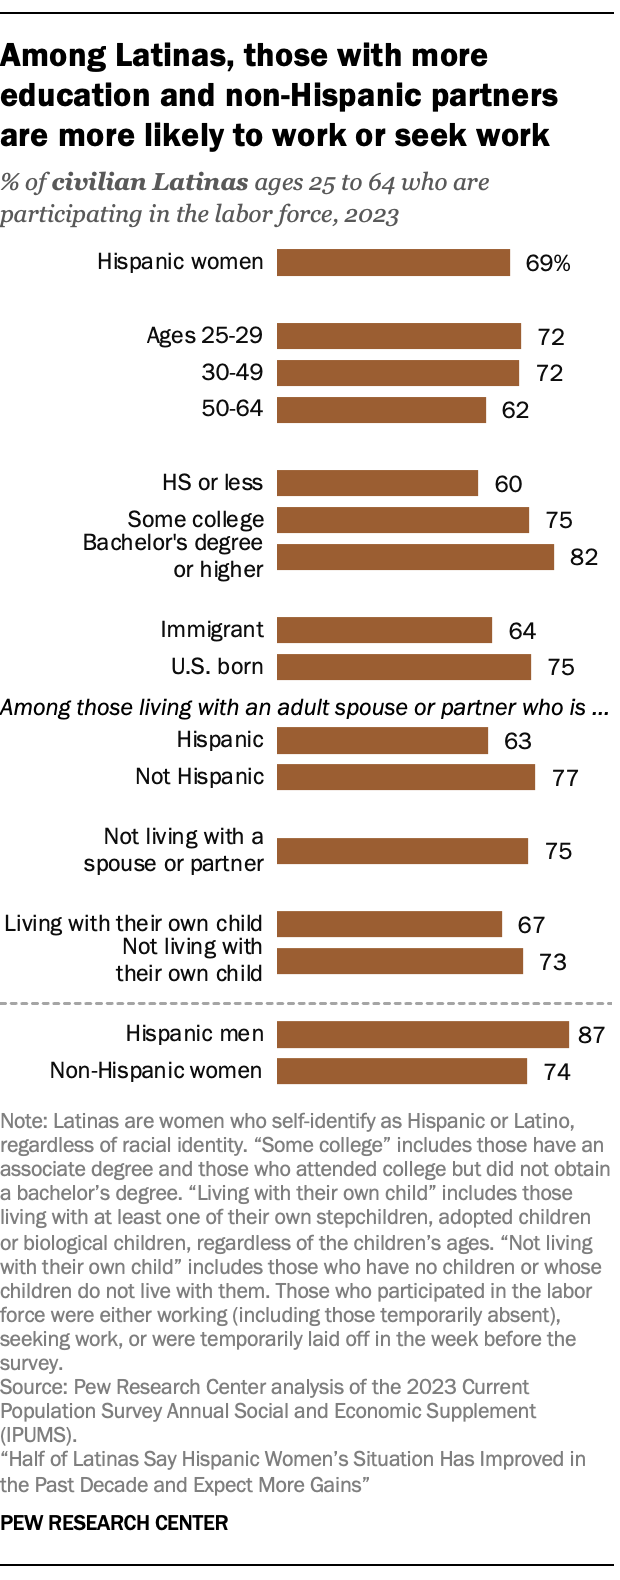 A bar chart showing that among Latinas, those with more education, non-Hispanic partners, are more likely to work or seek work. In 2023, 82% of Latinas with a bachelor’s and 77% of Latinas living with a non-Hispanic spouse or partner participated in the labor force.